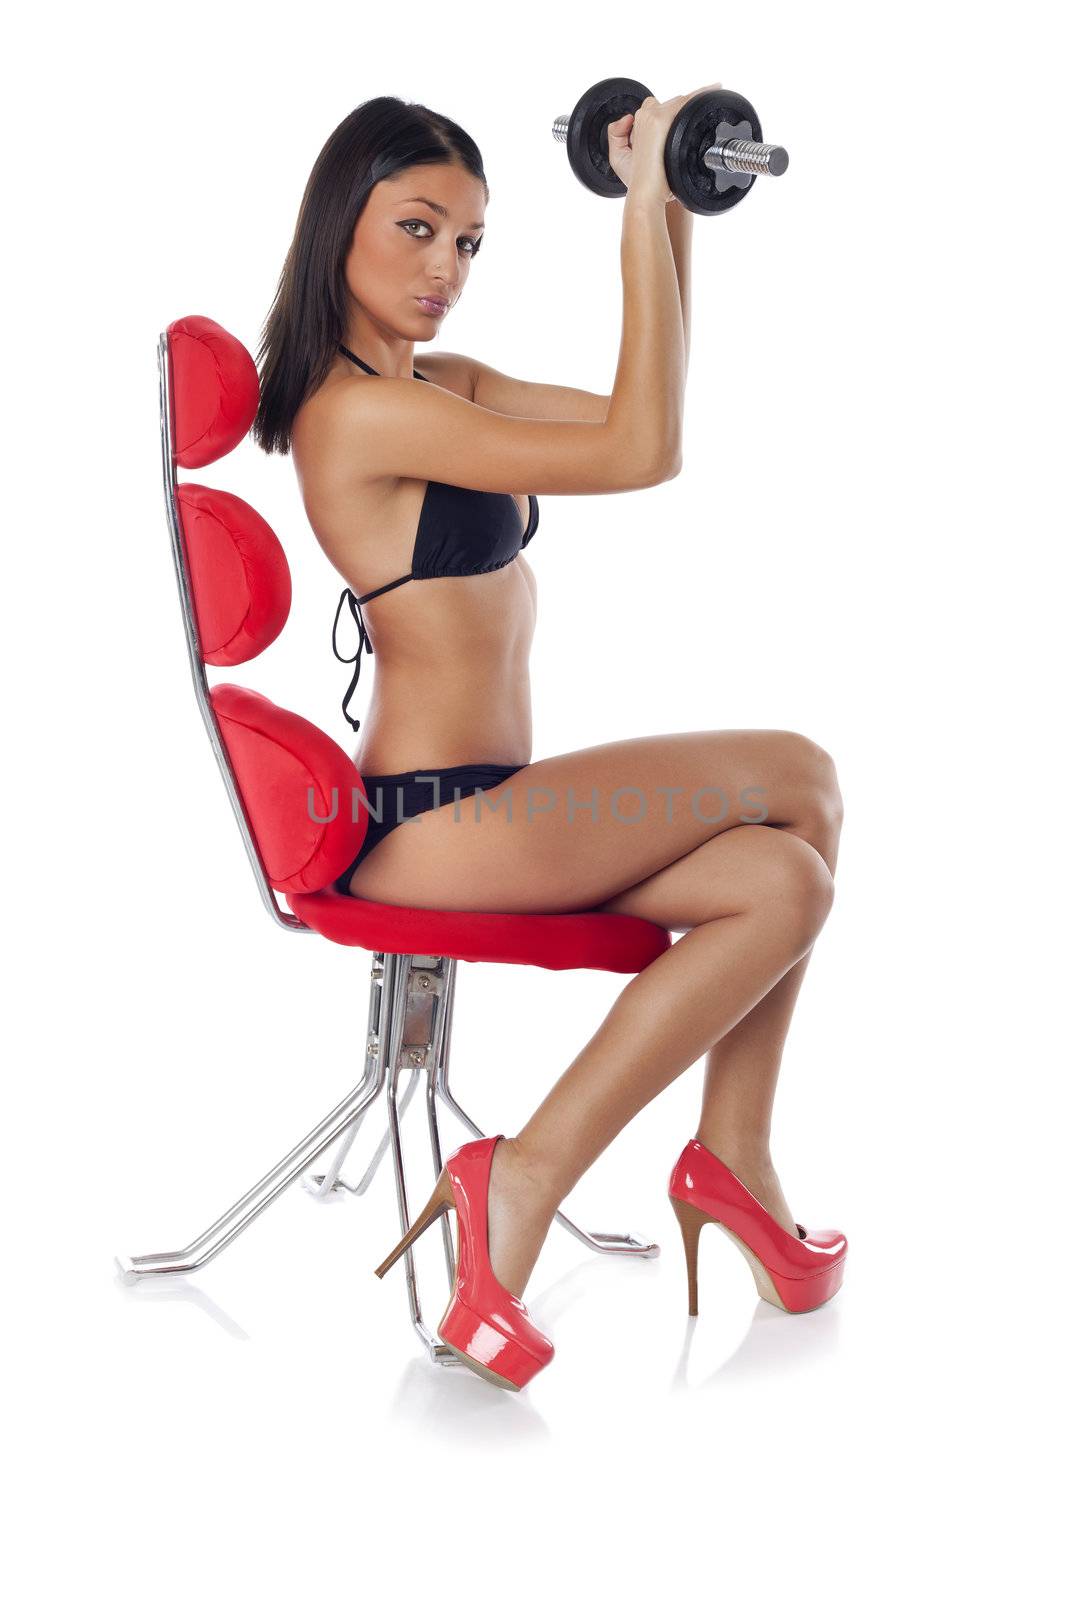 Beautiful woman sitting on red chair and training with dumbbells 